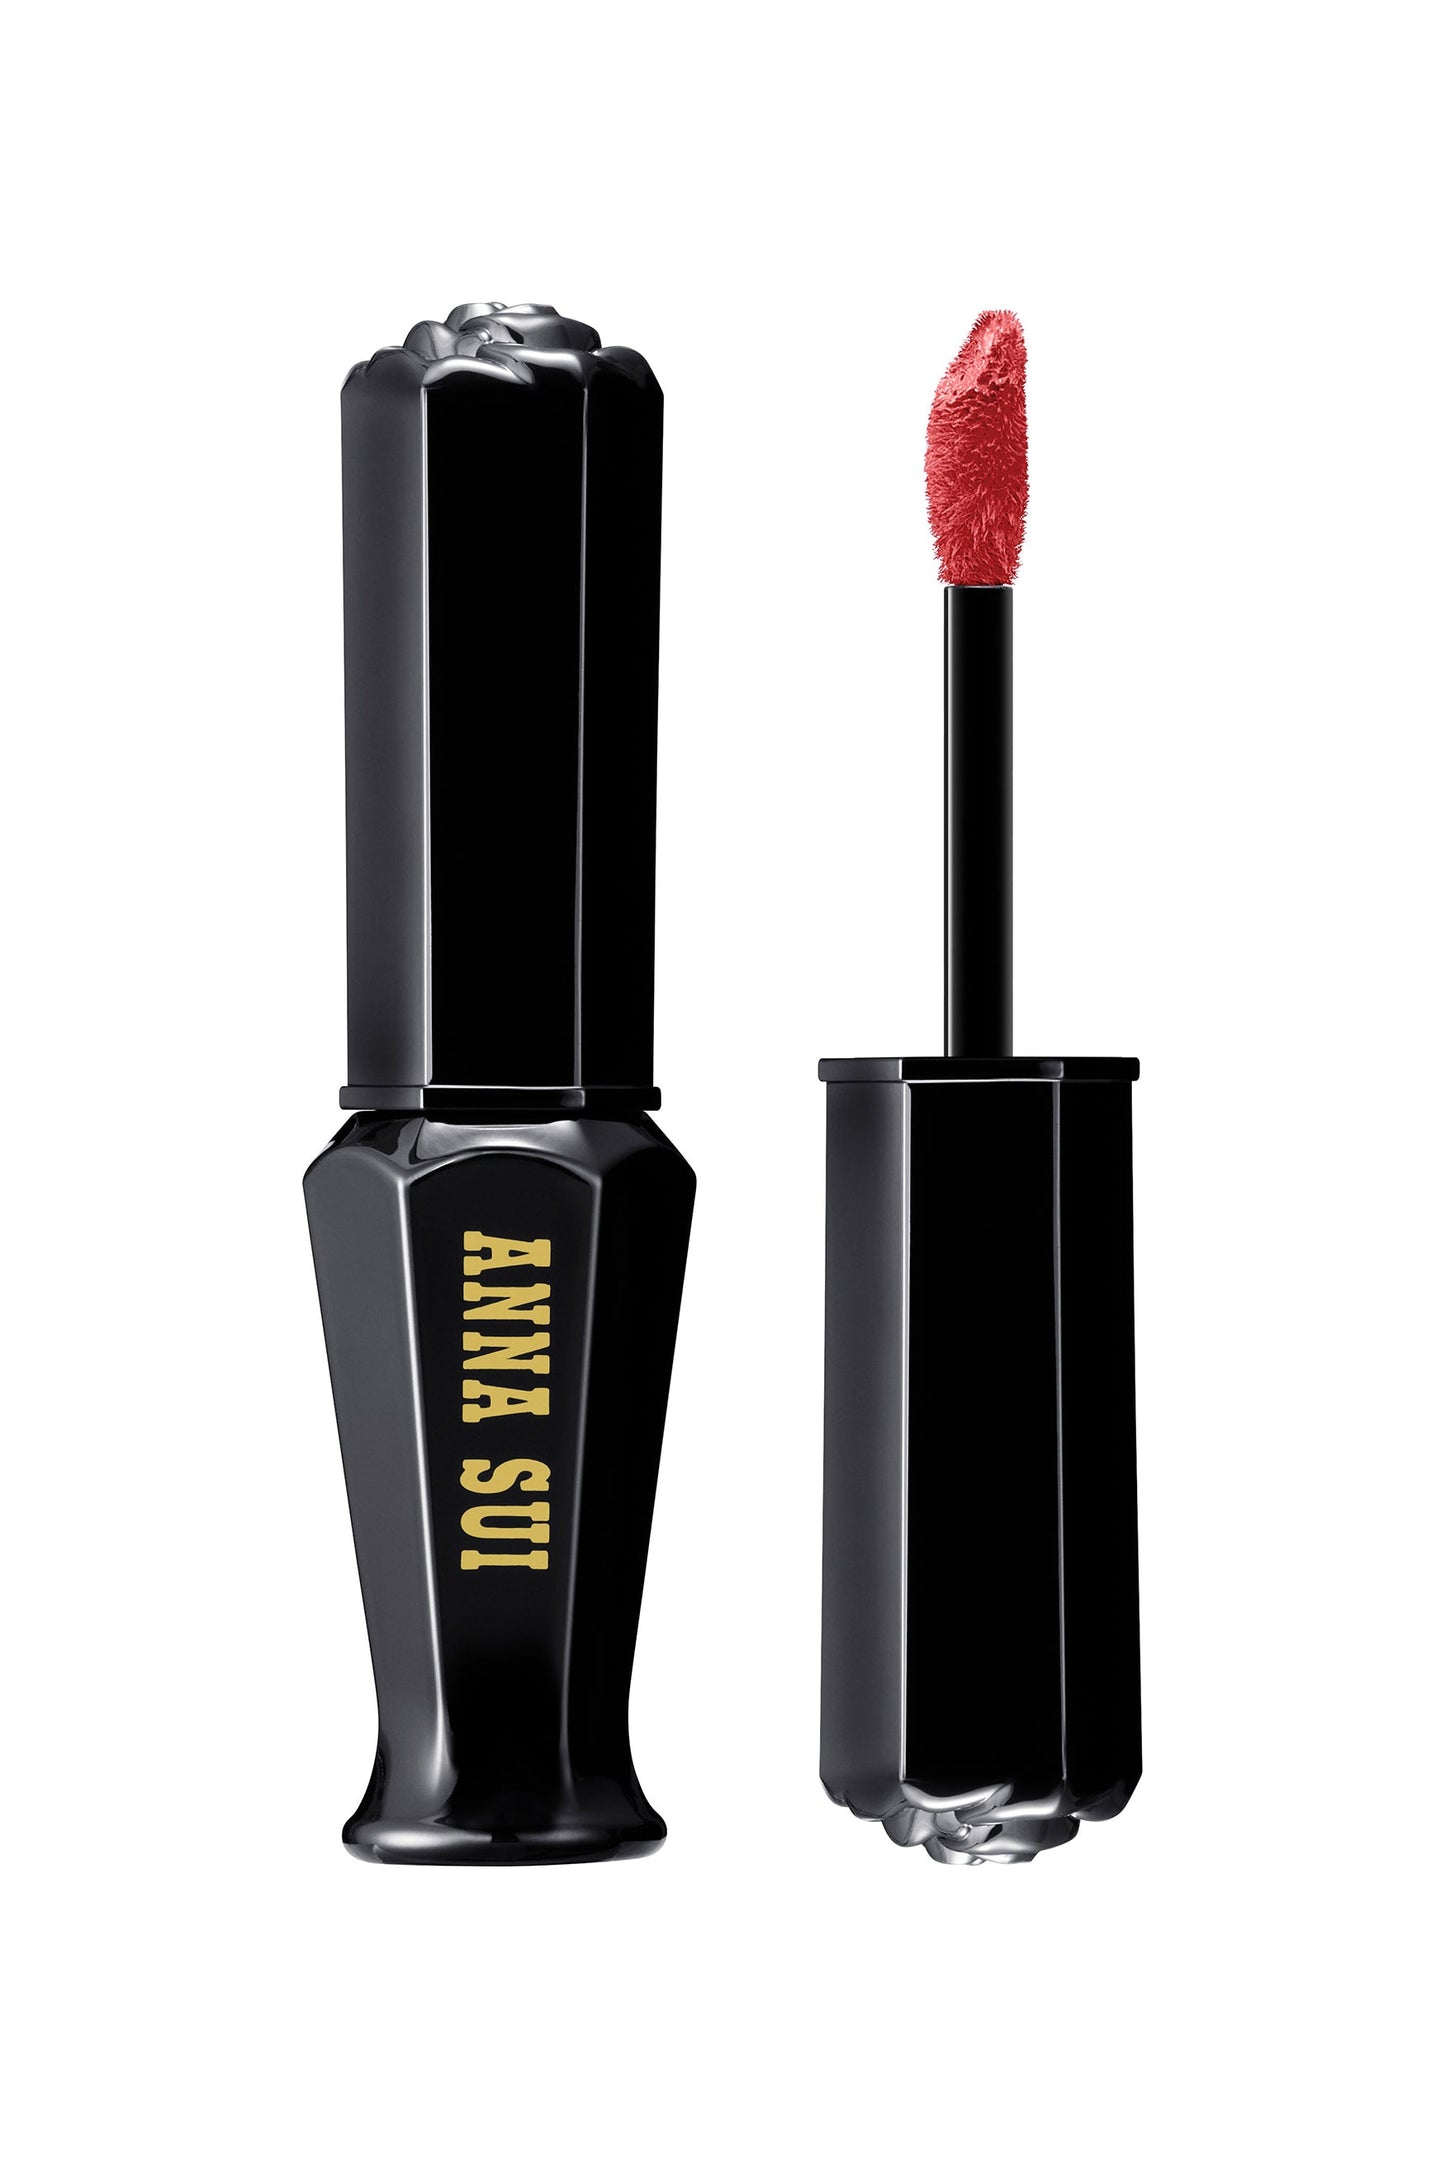 New: Anna Sui Everlasting Rouge